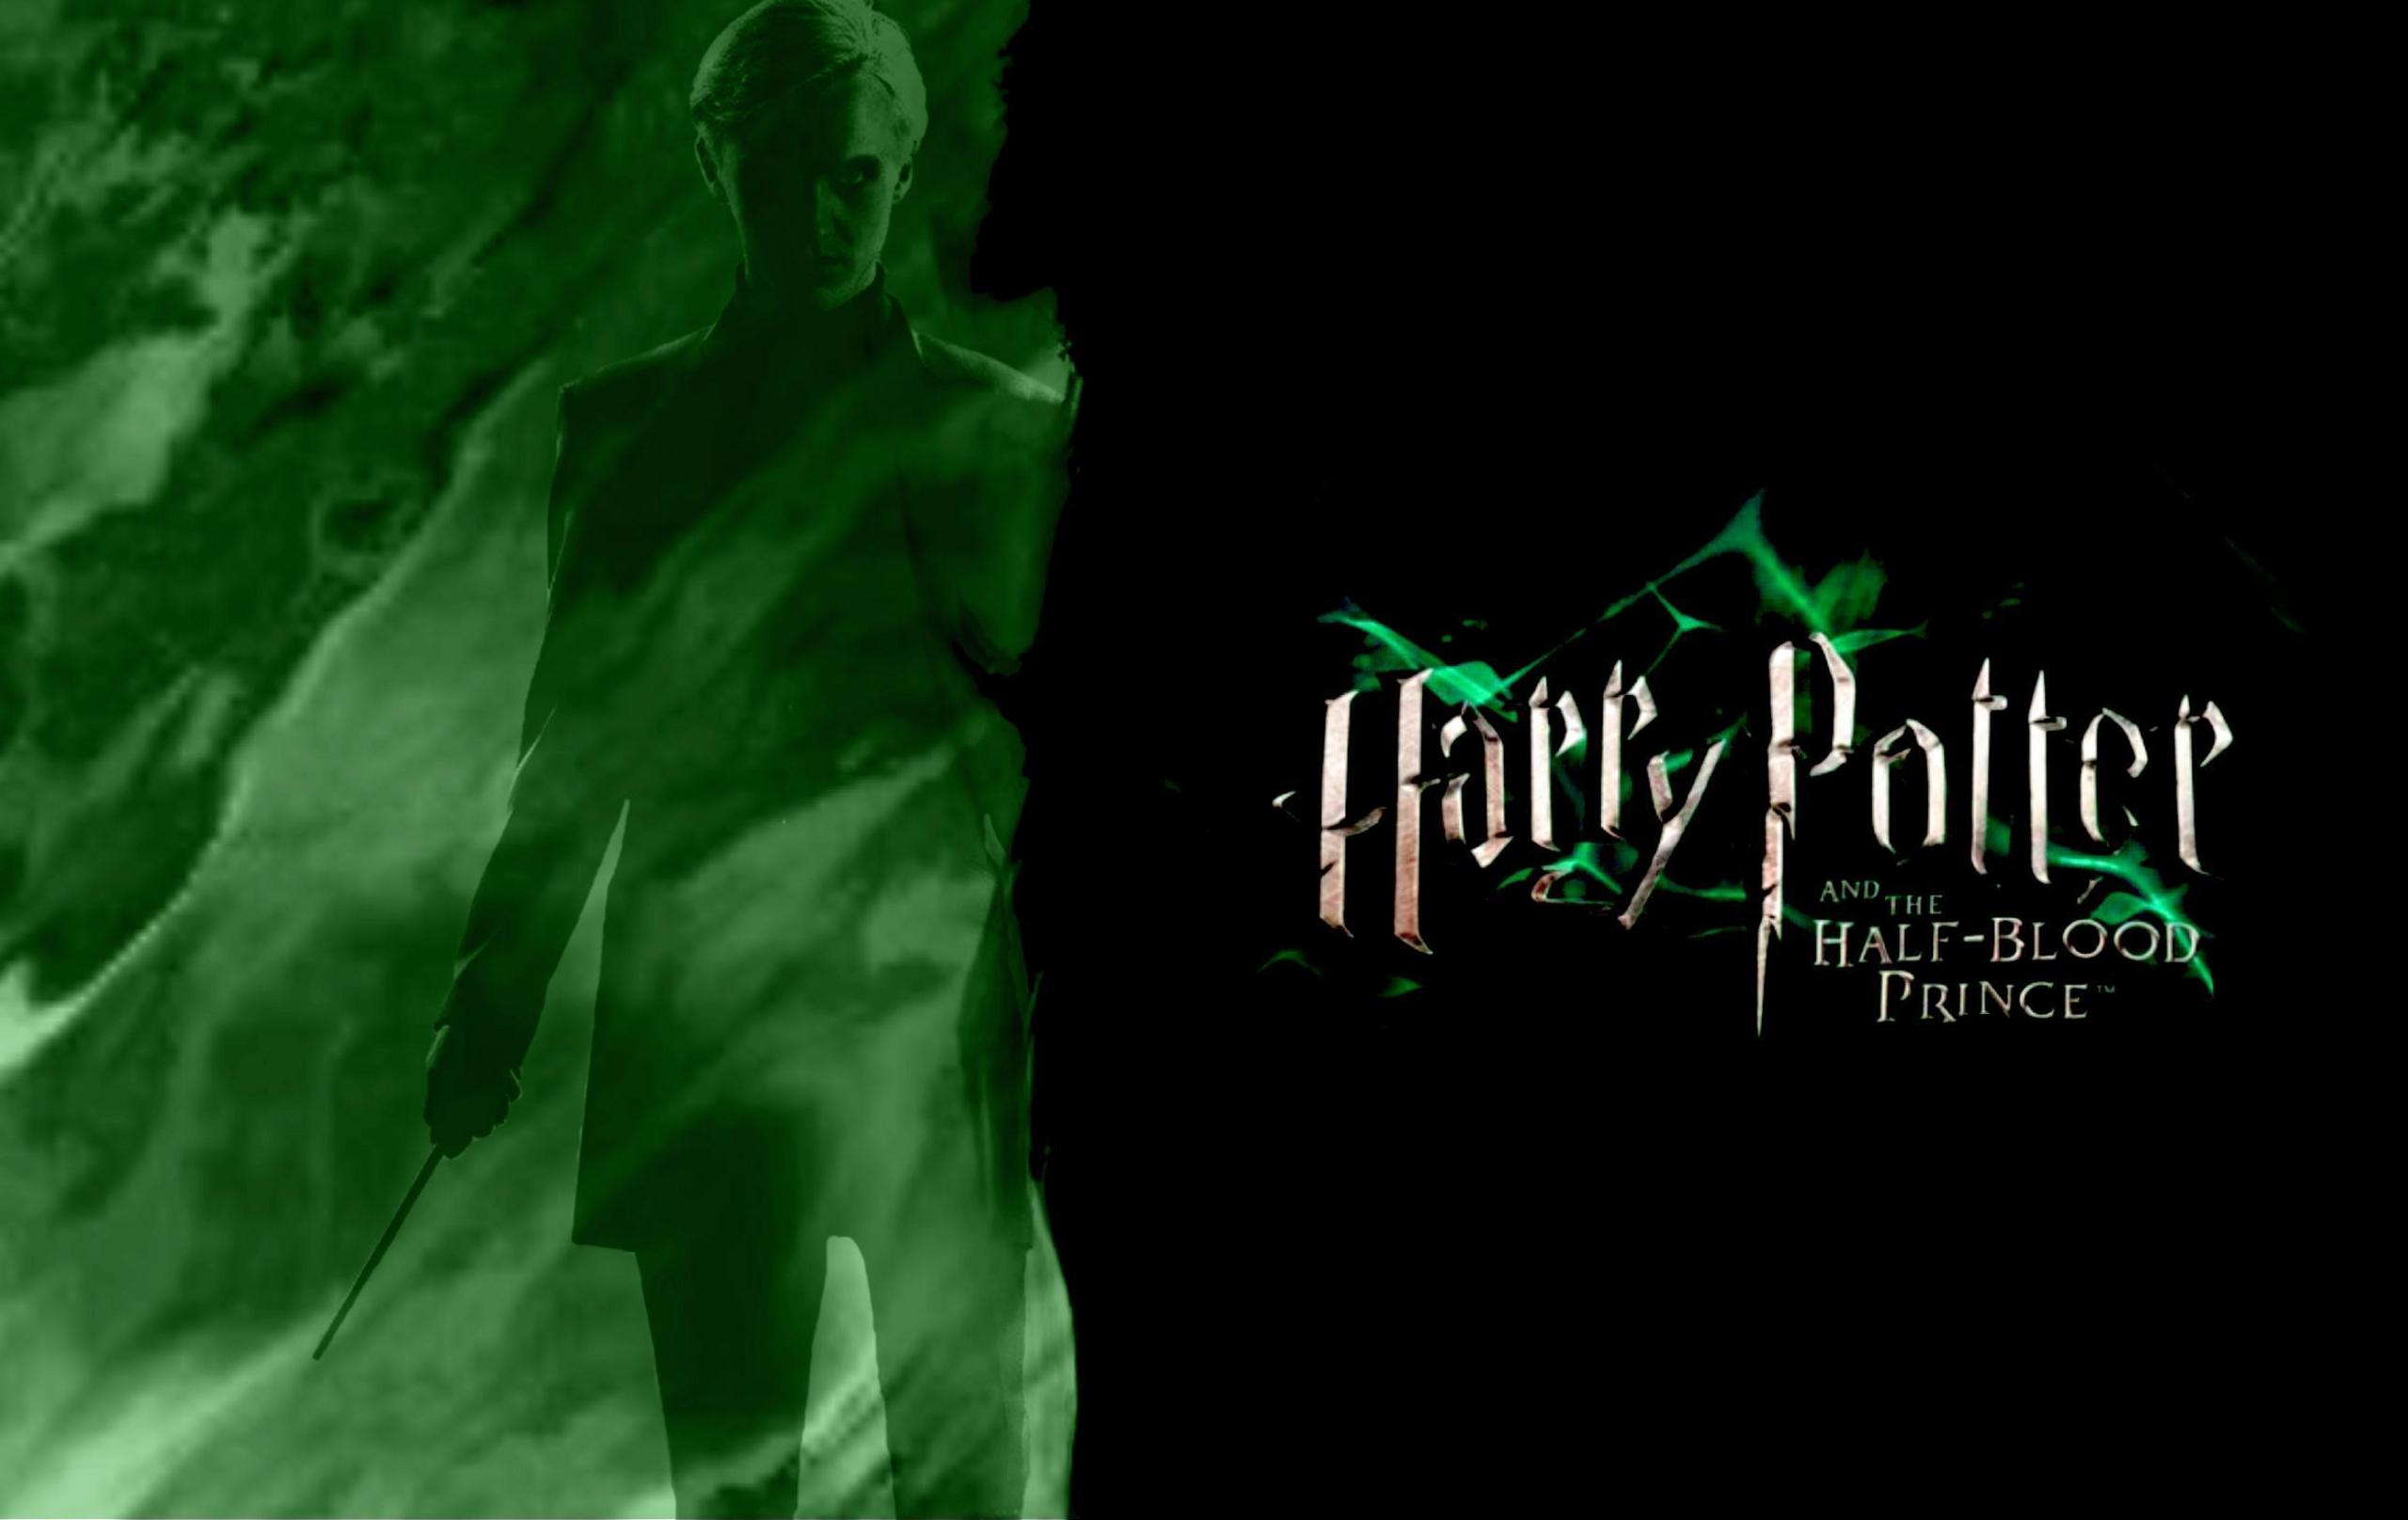 Harry Potter And The Half-blood Prince Wallpaper Featuring - Darkness - HD Wallpaper 